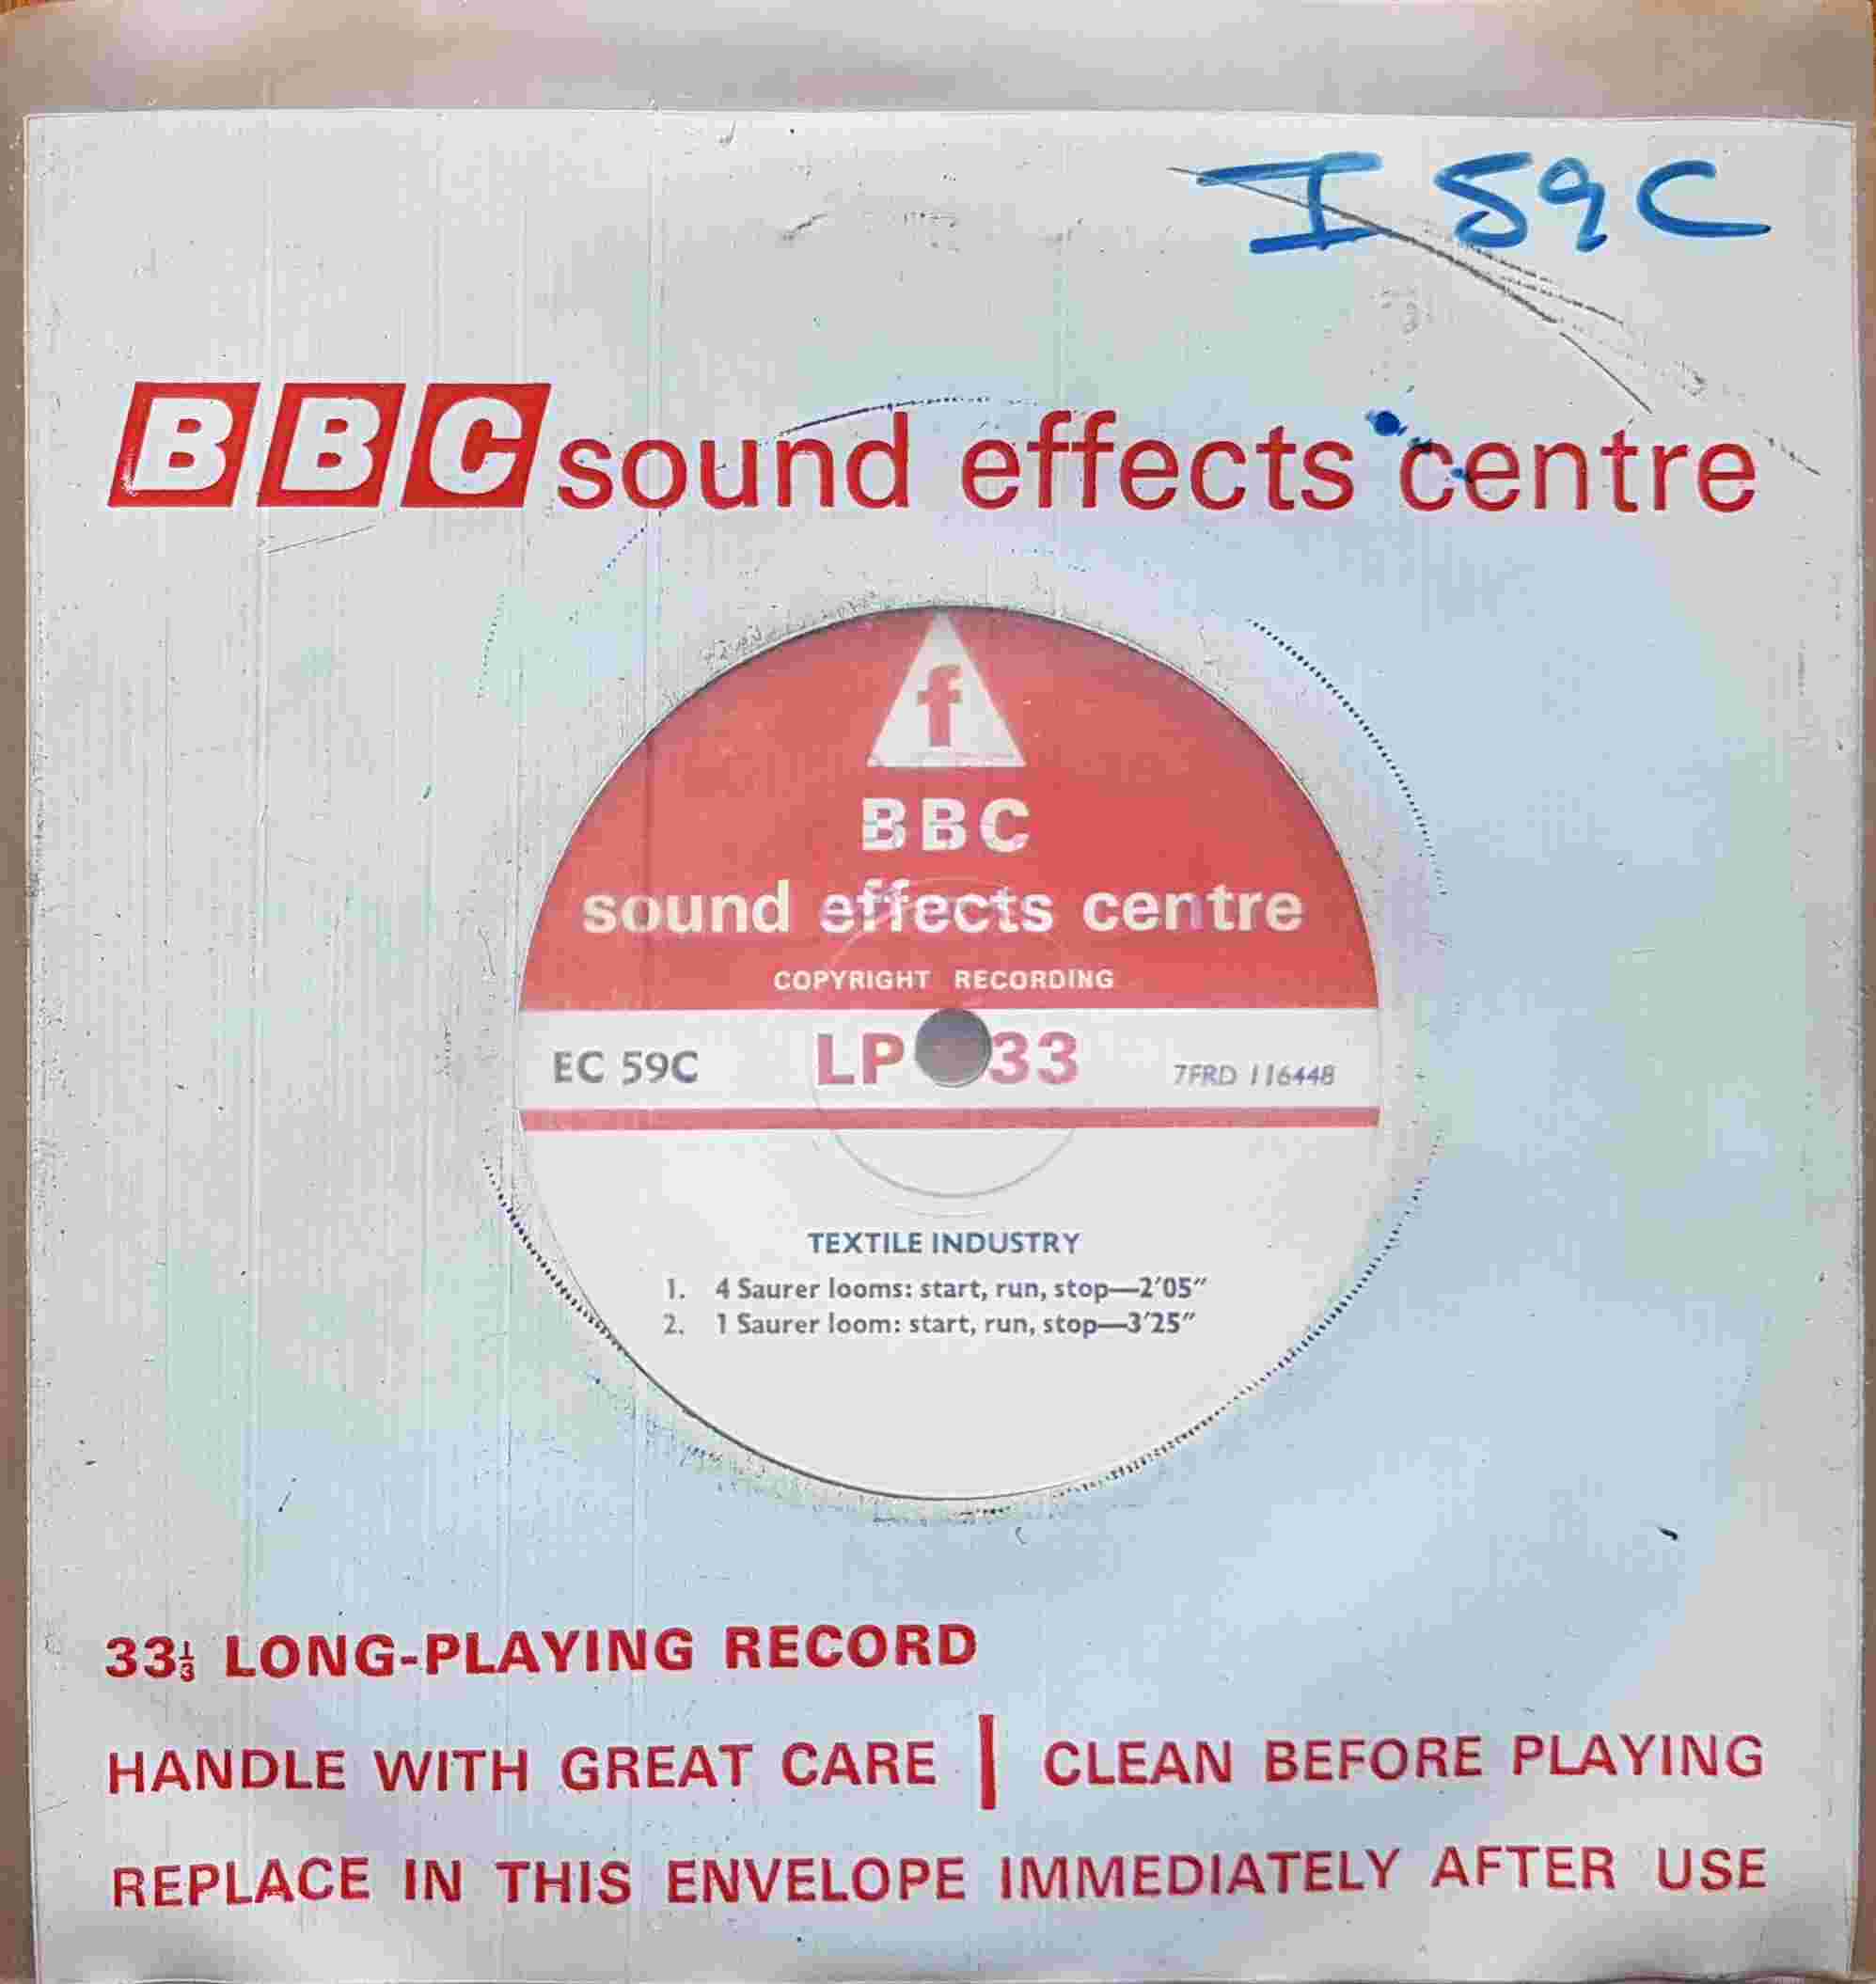 Picture of EC 59C Textile industry single by artist Not registered from the BBC records and Tapes library